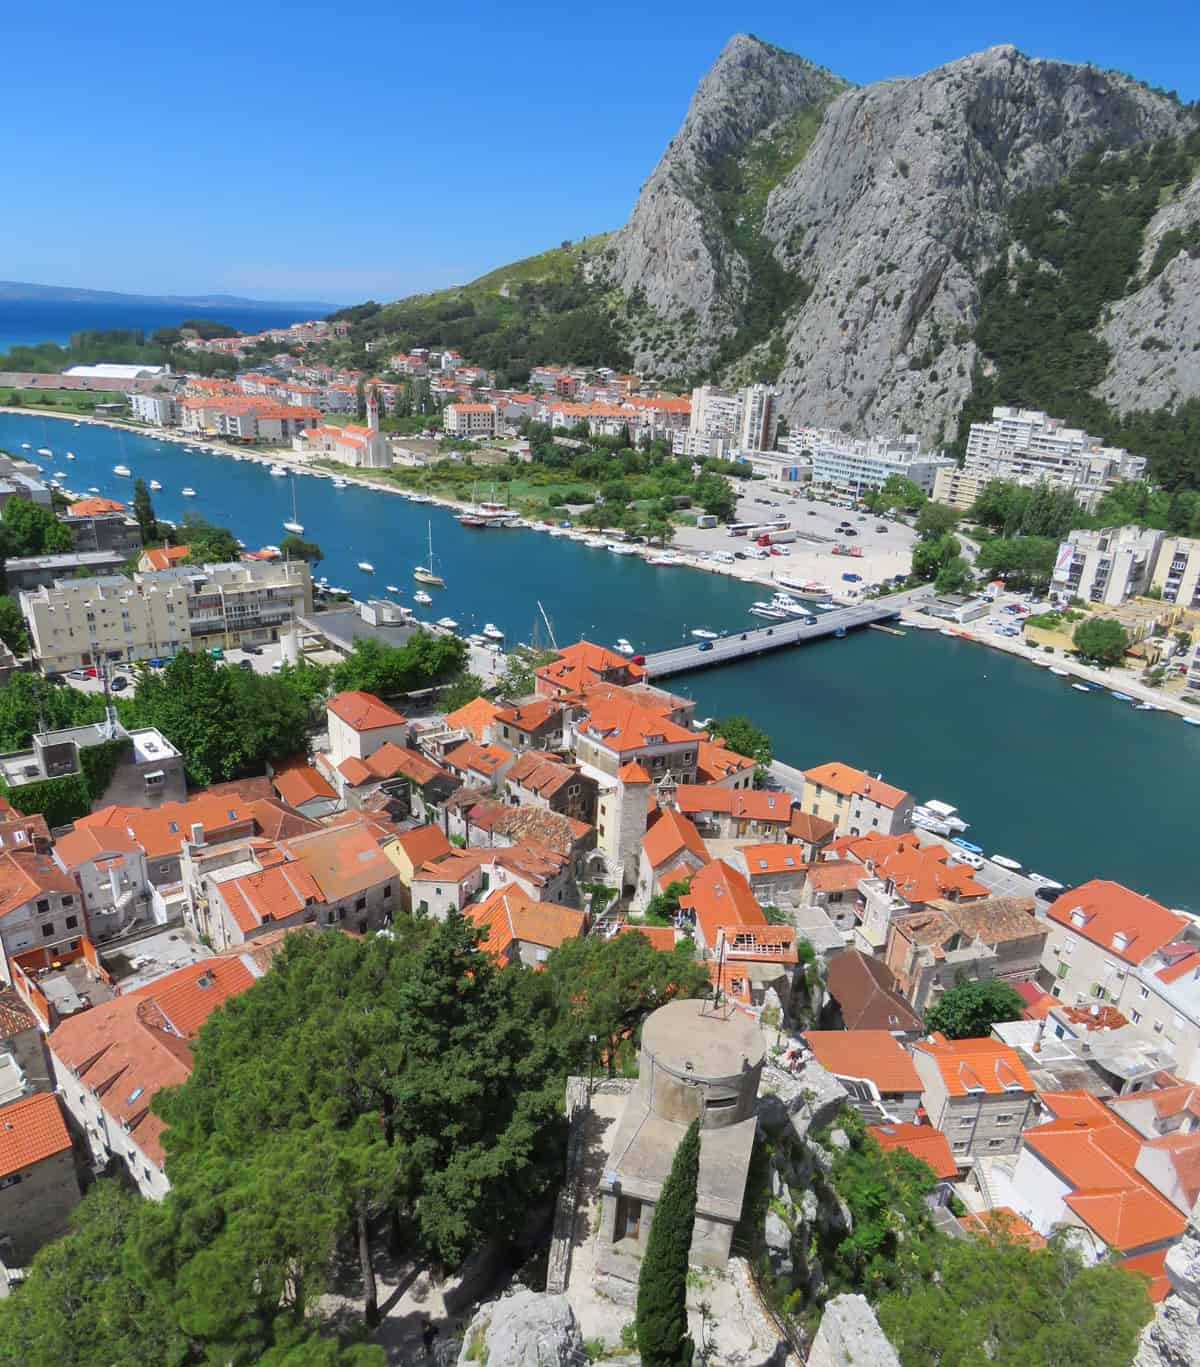 views from Views from Mirabella Fortress, Omis, Croatia. A visit to Omiš: Croatia’s Adventure Capital